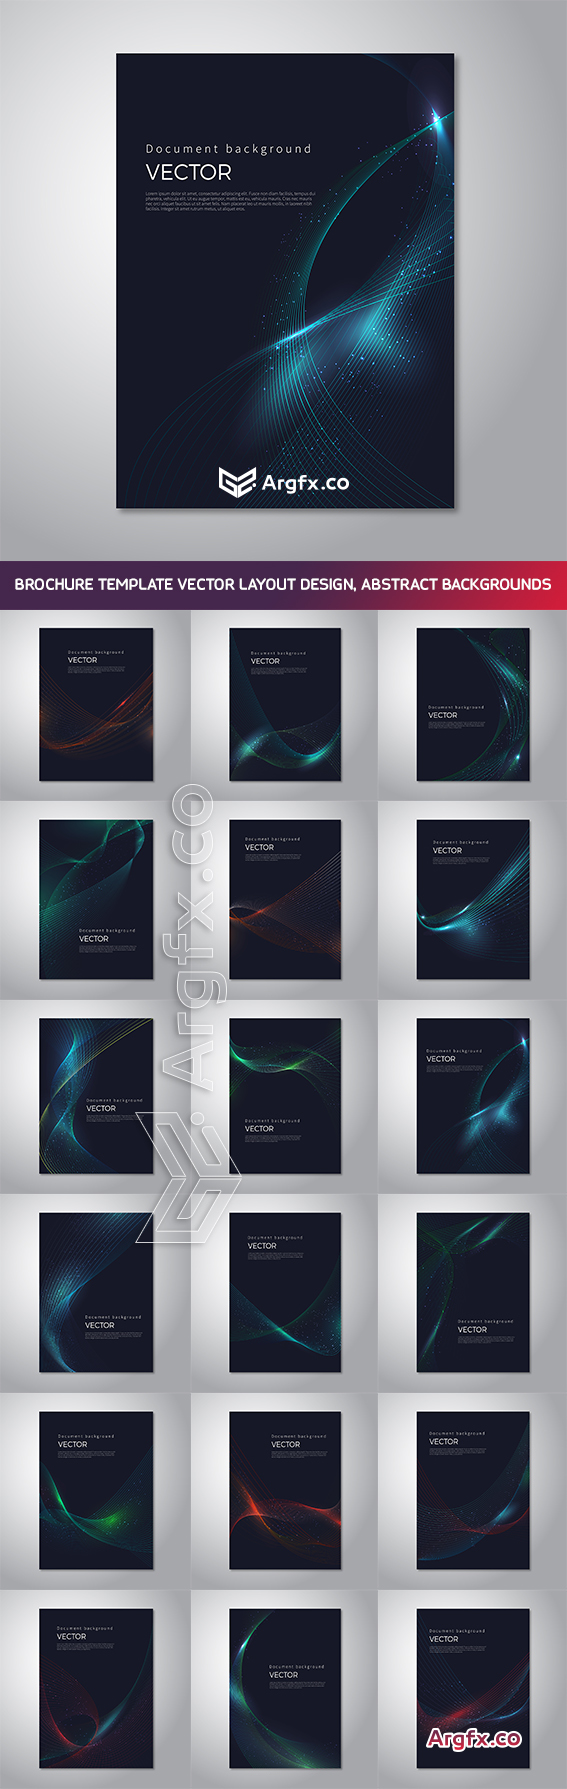  Brochure template vector layout design, abstract backgrounds